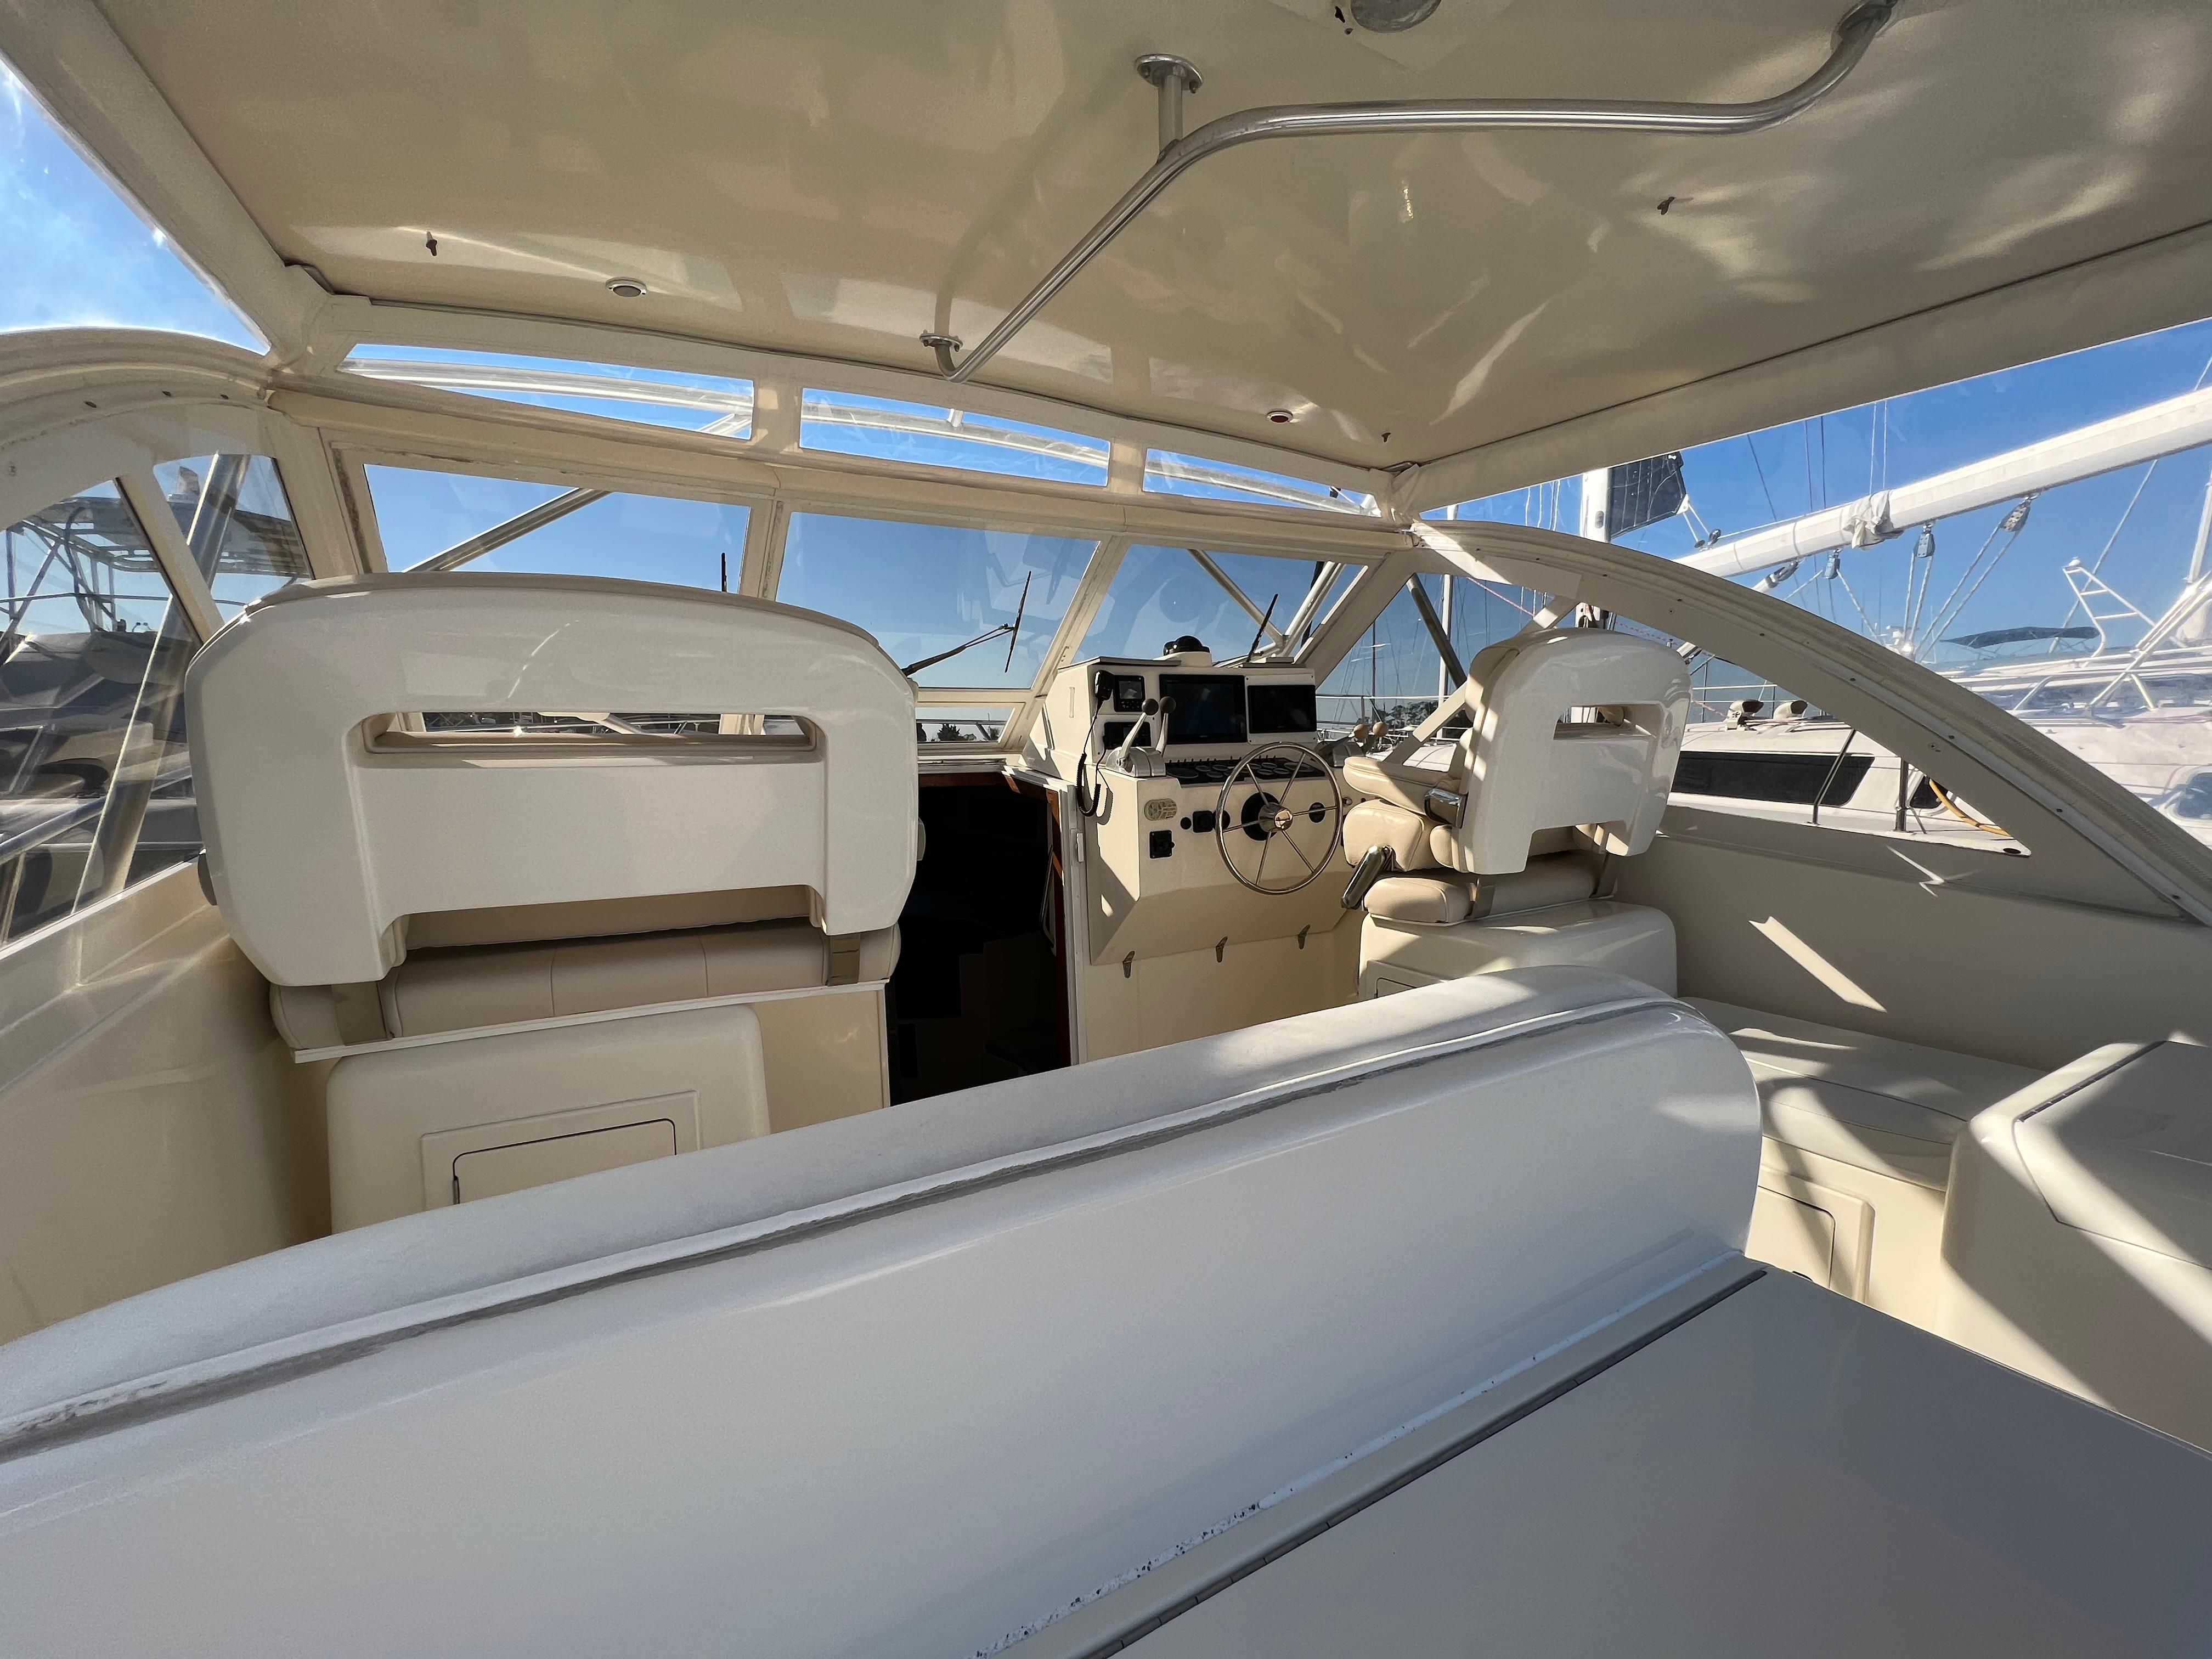  Yacht Brokers Of Annapolis